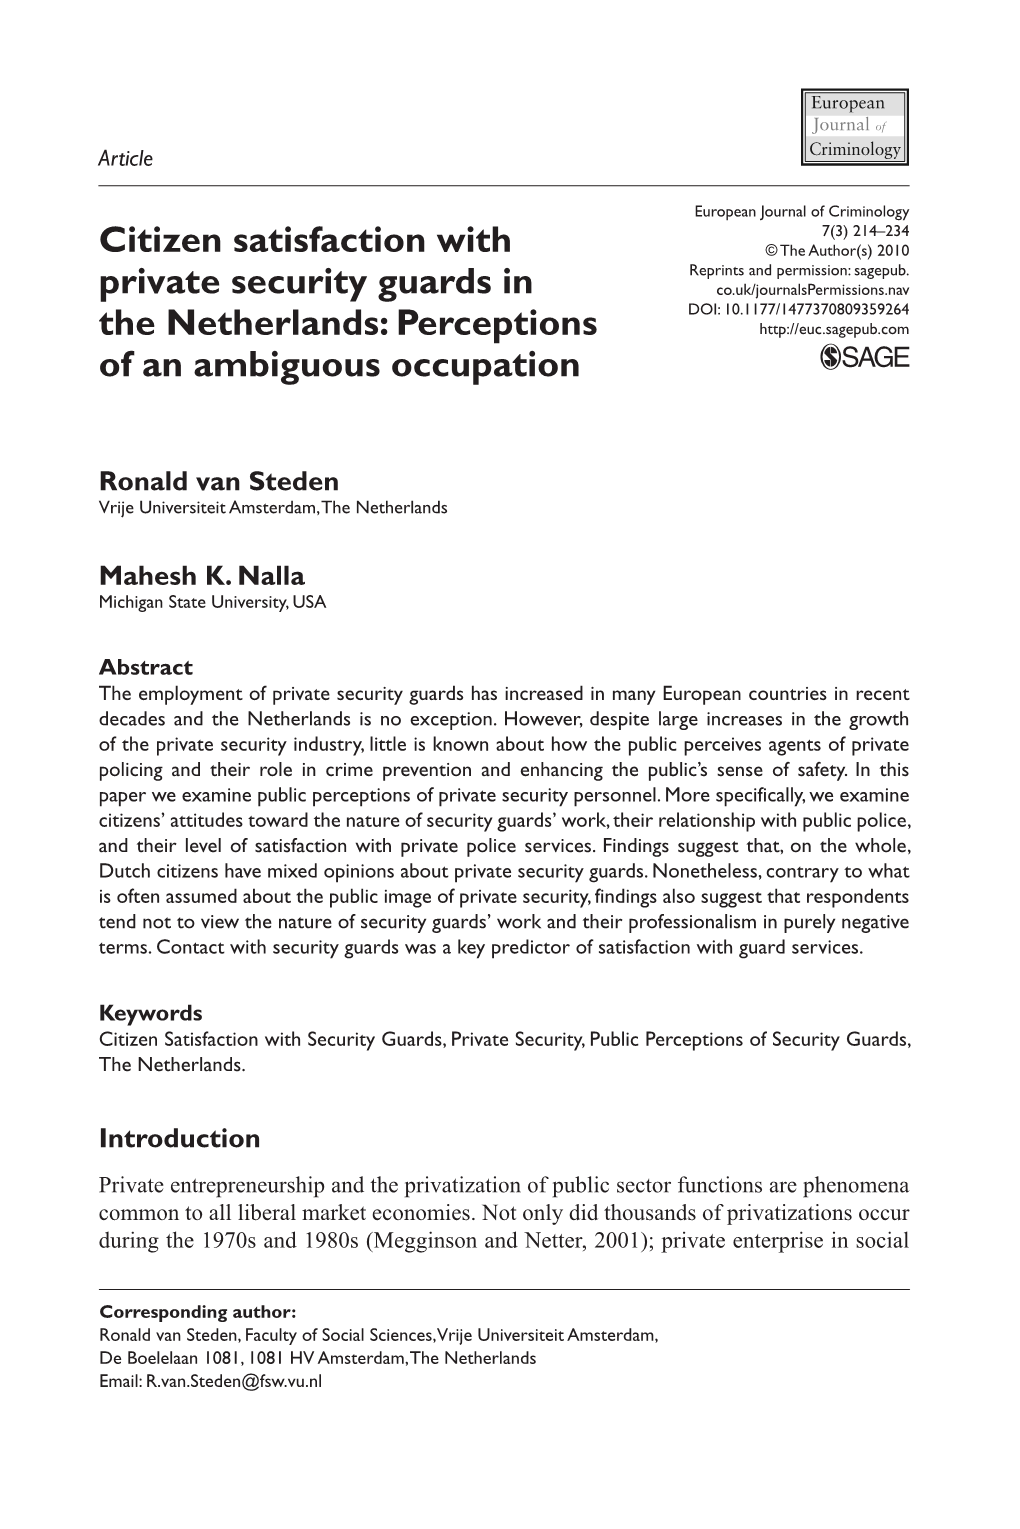 Citizen Satisfaction with Private Security Guards in the Netherlands: Perceptions of an Ambiguous Occupation